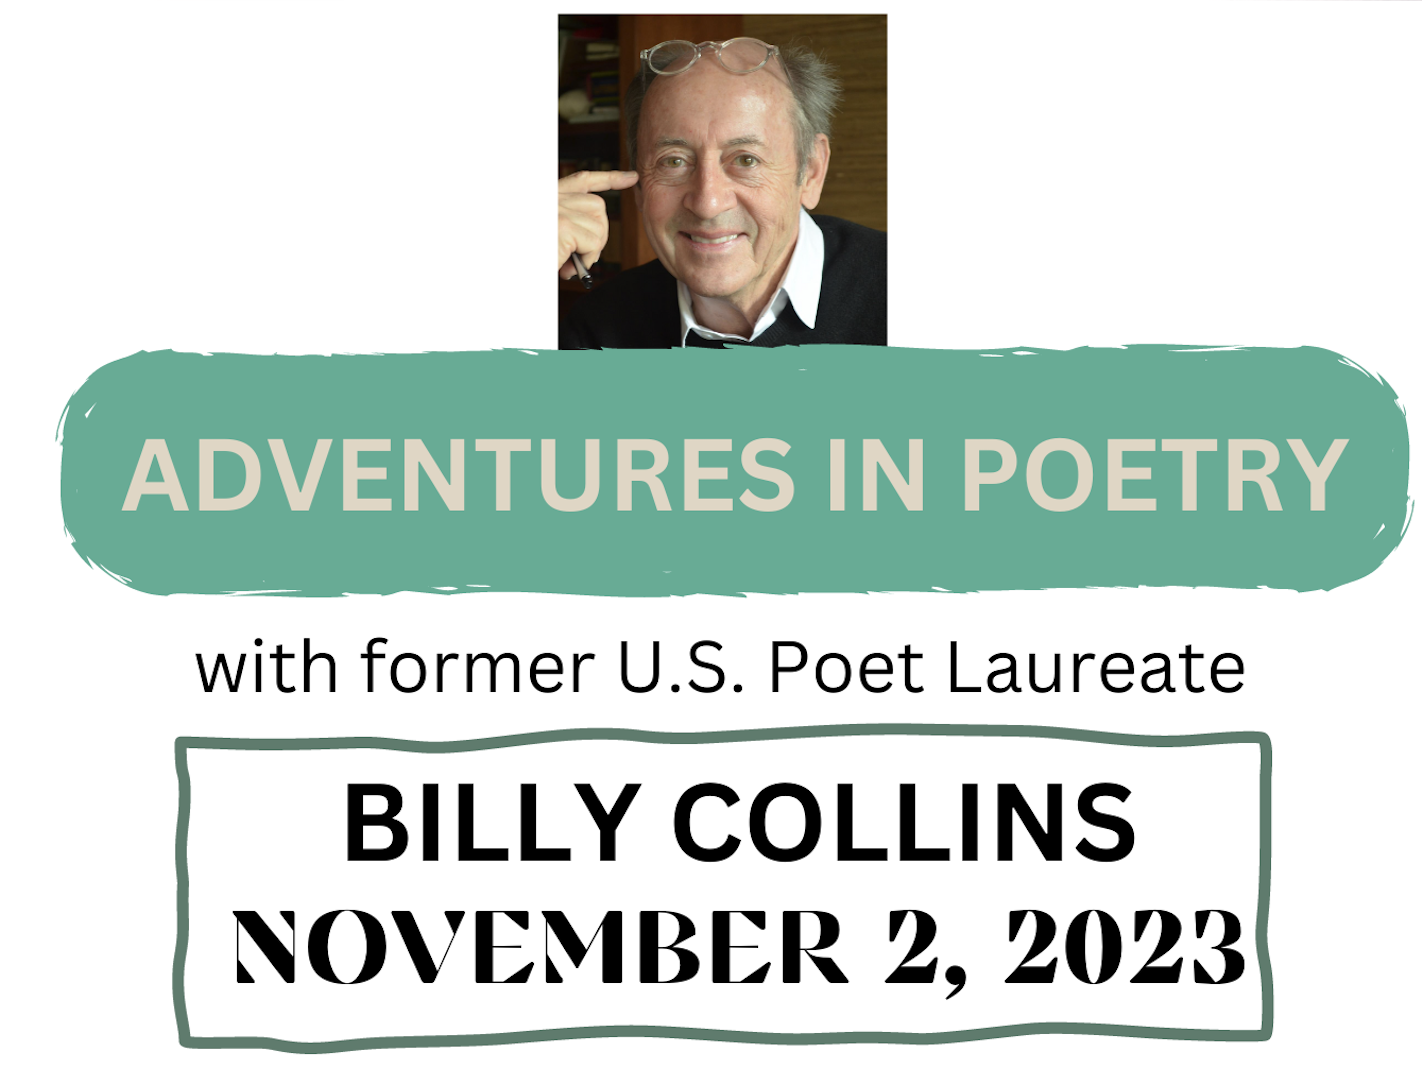 A flyer advertising the LRJF's special event featuring former US Poet Laureate Billy Collins, held on November 2nd, 2023. The event is titled "Adventures in Poetry".